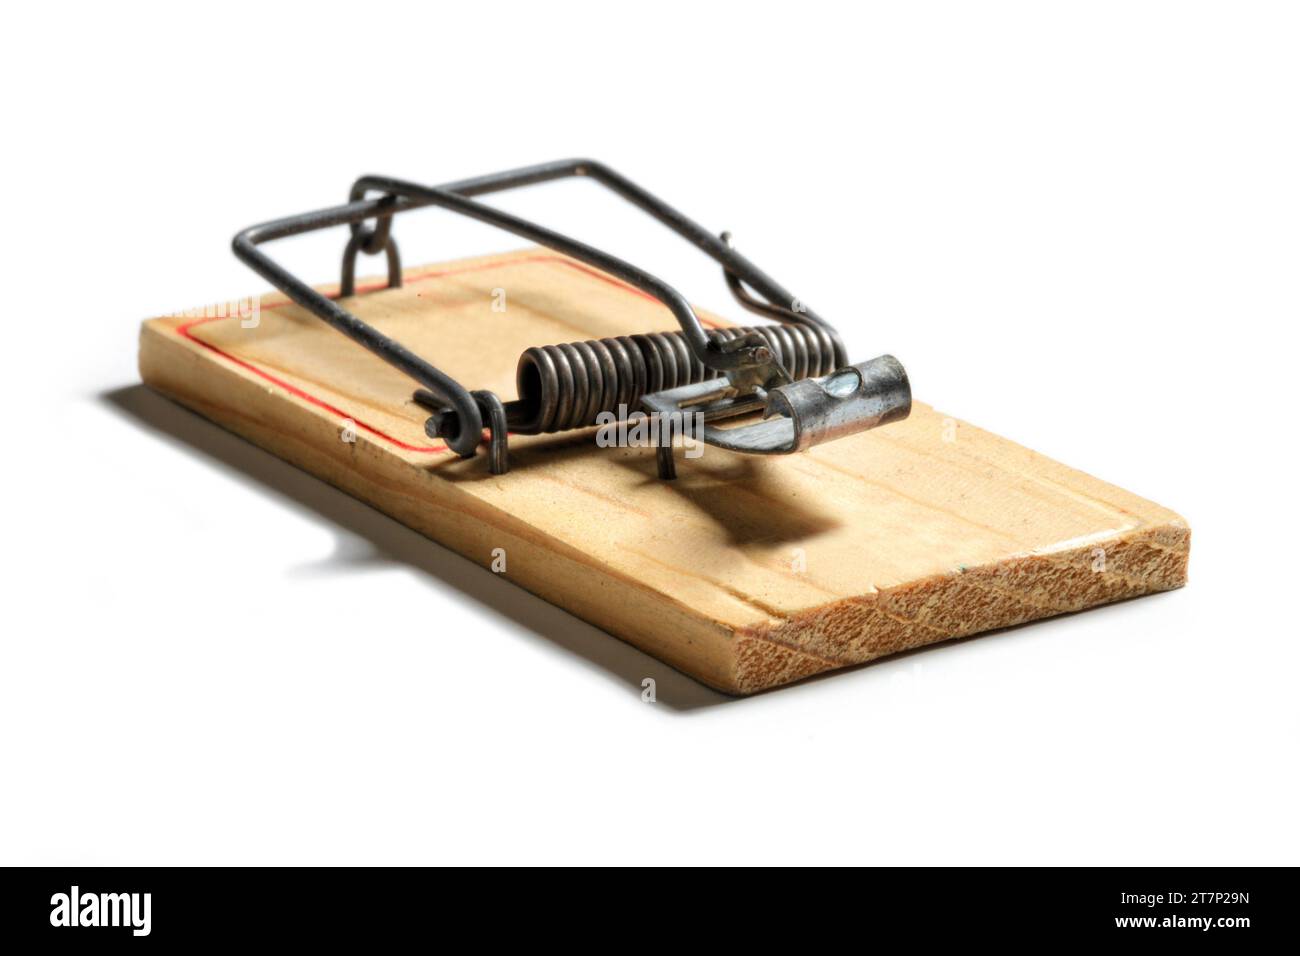 An inexpensive wood mousetrap, set to capture it's victim. Stock Photo